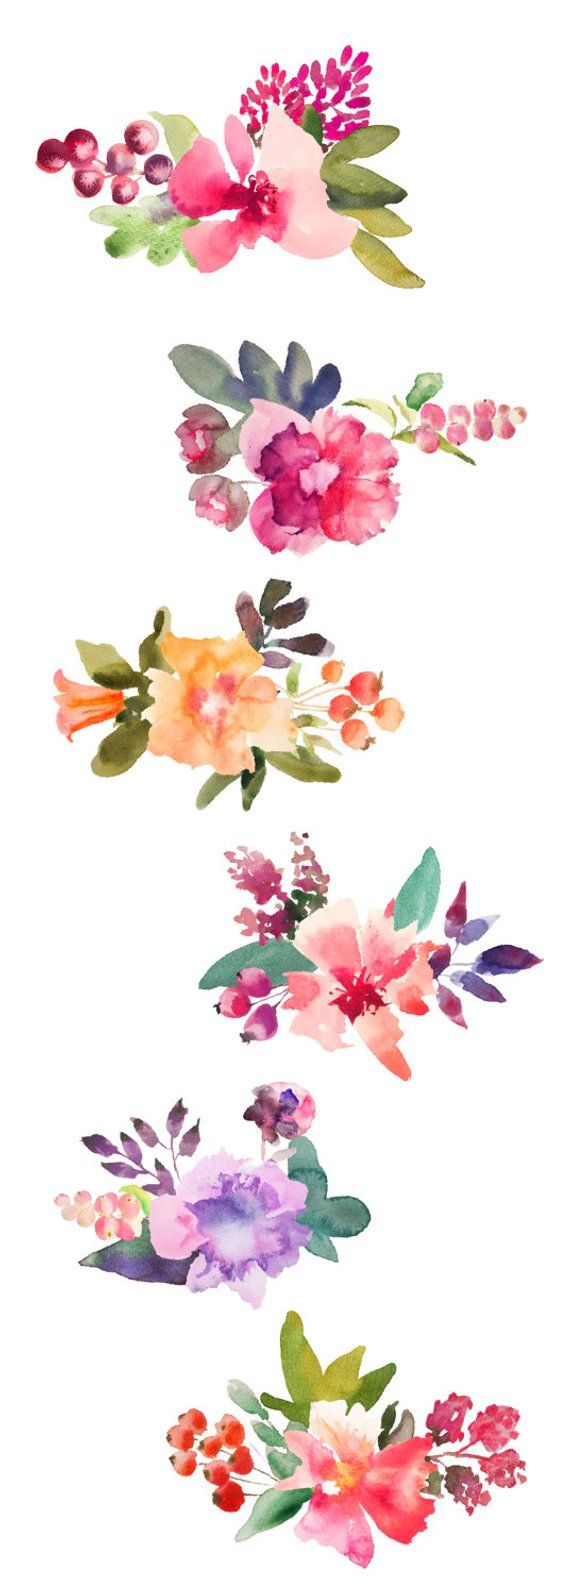 Watercolor flowers clipart.